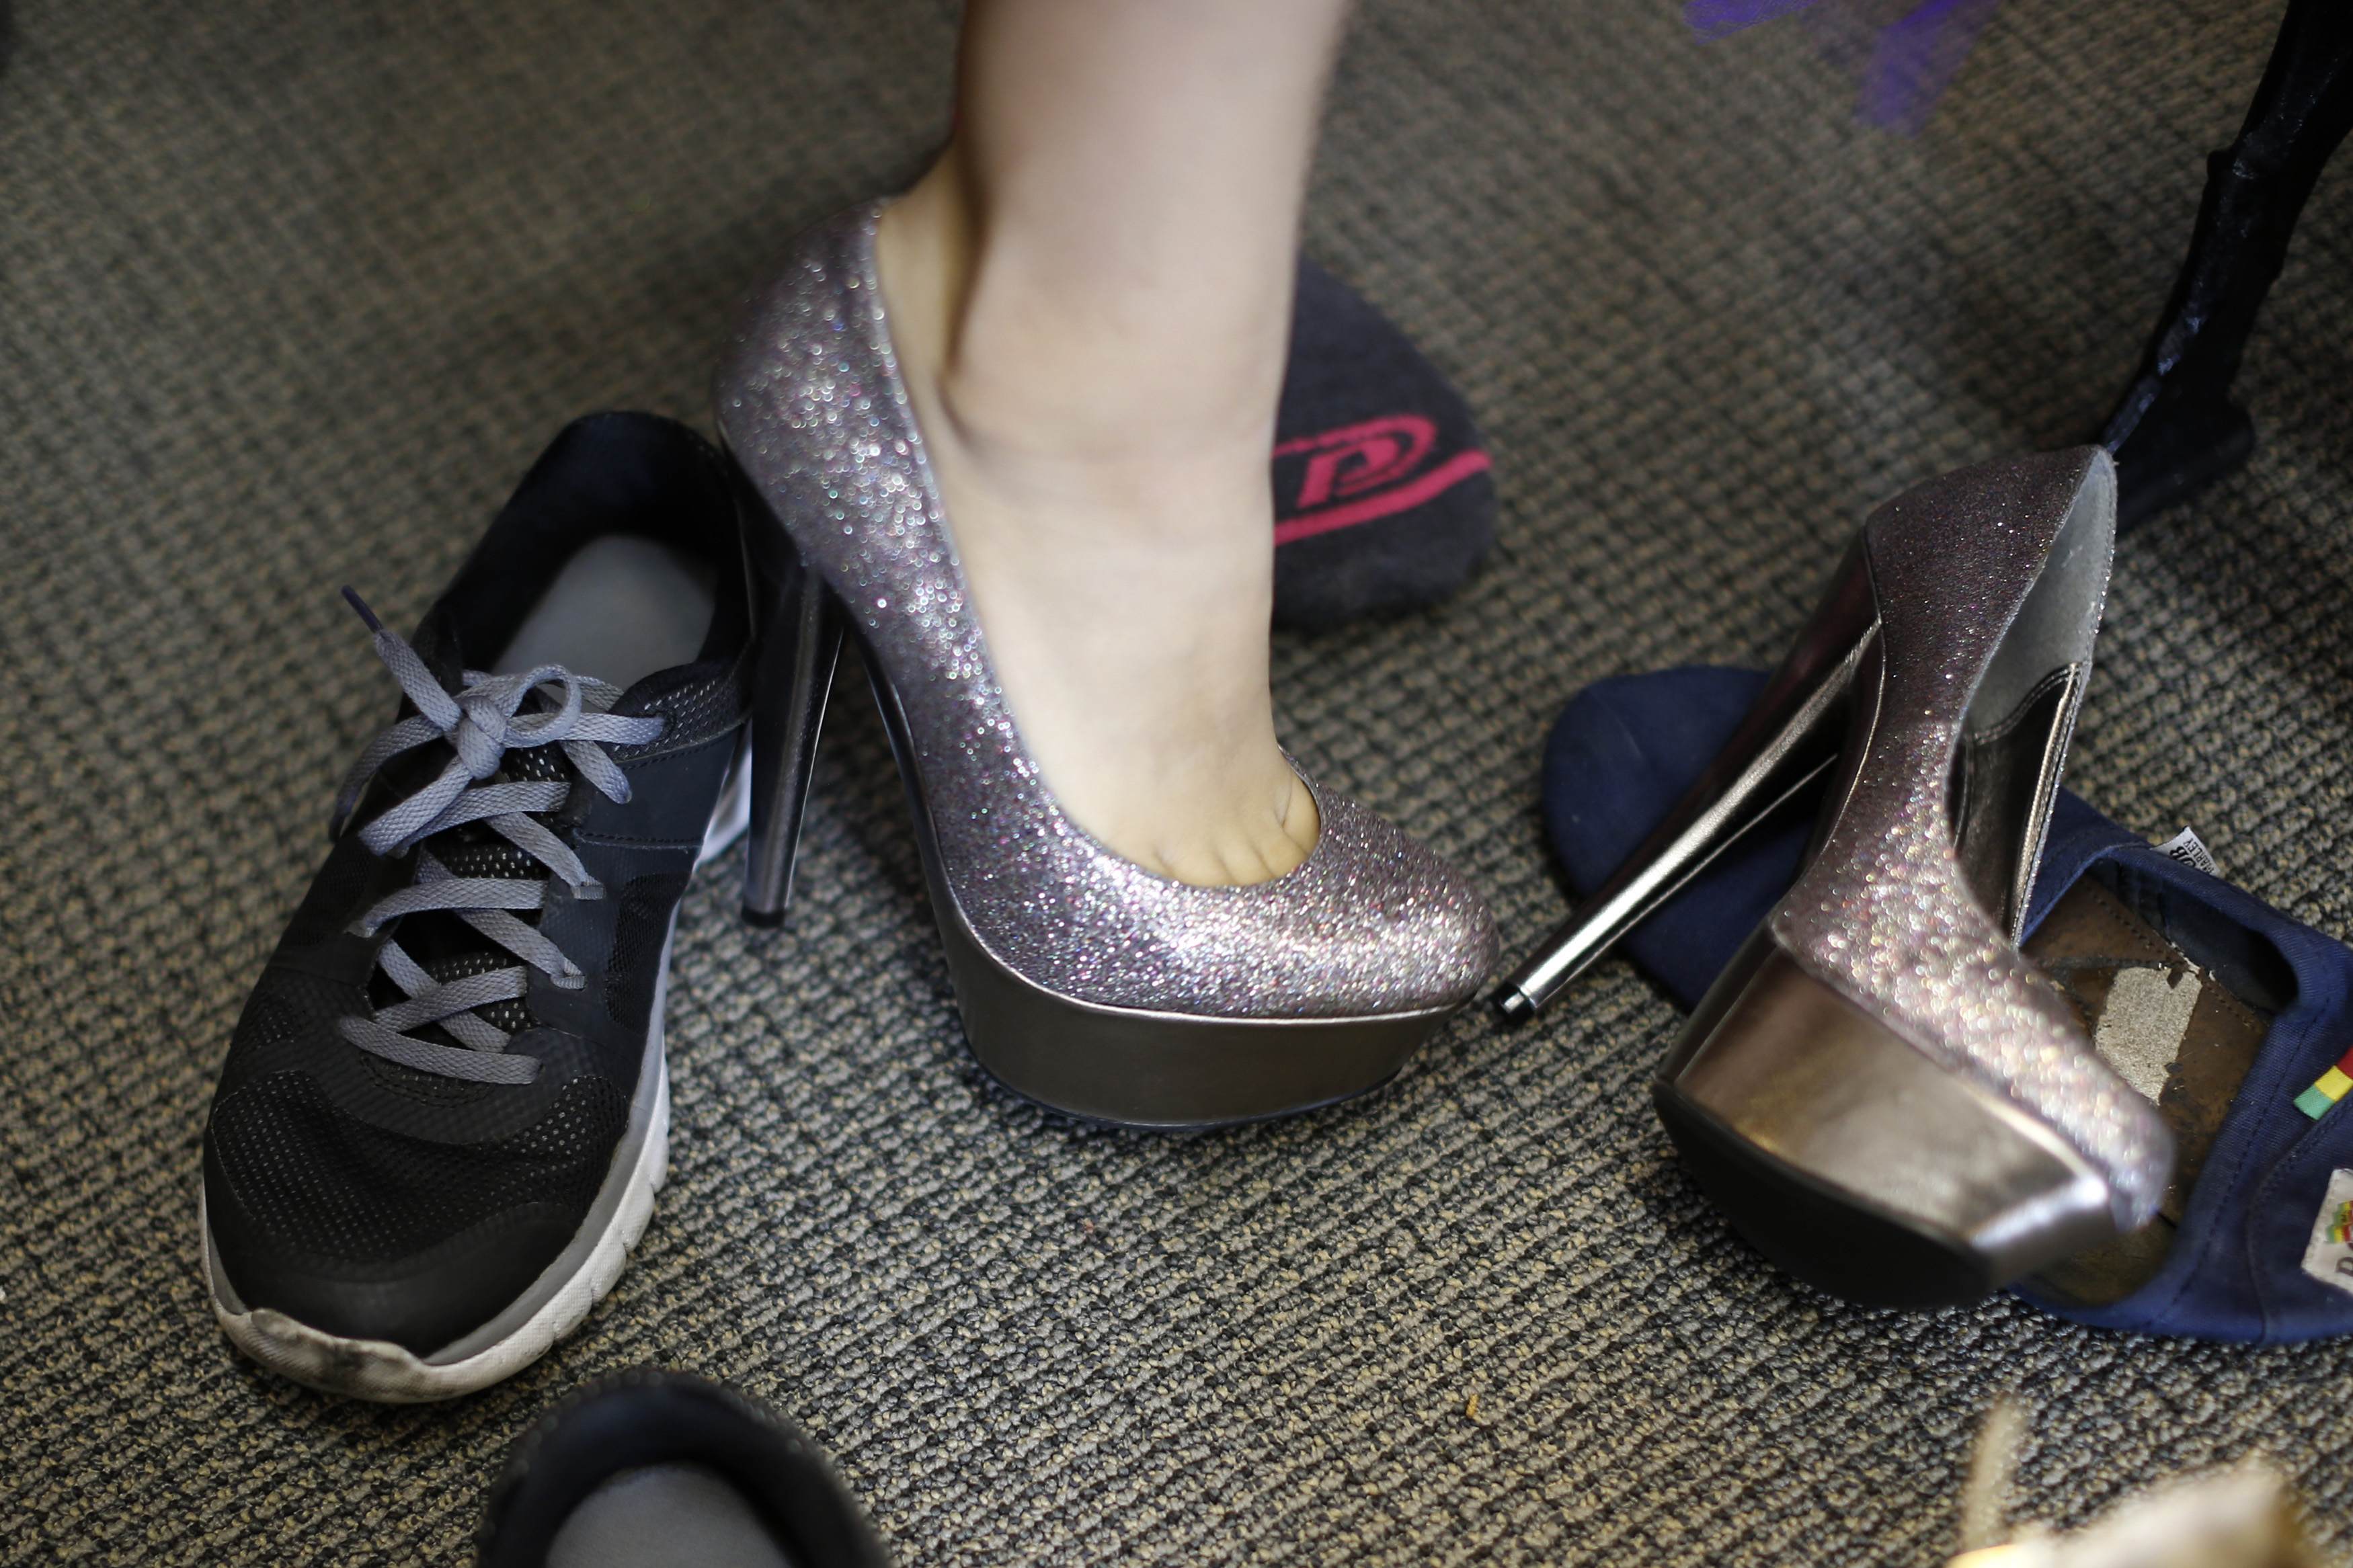 A girl tries on stilettos at an event that provides free prom dresses, shoes and accessories to 70 homeless and low income school girls from the Assistance League of Los Angeles in Los Angeles, California March 5, 2015.